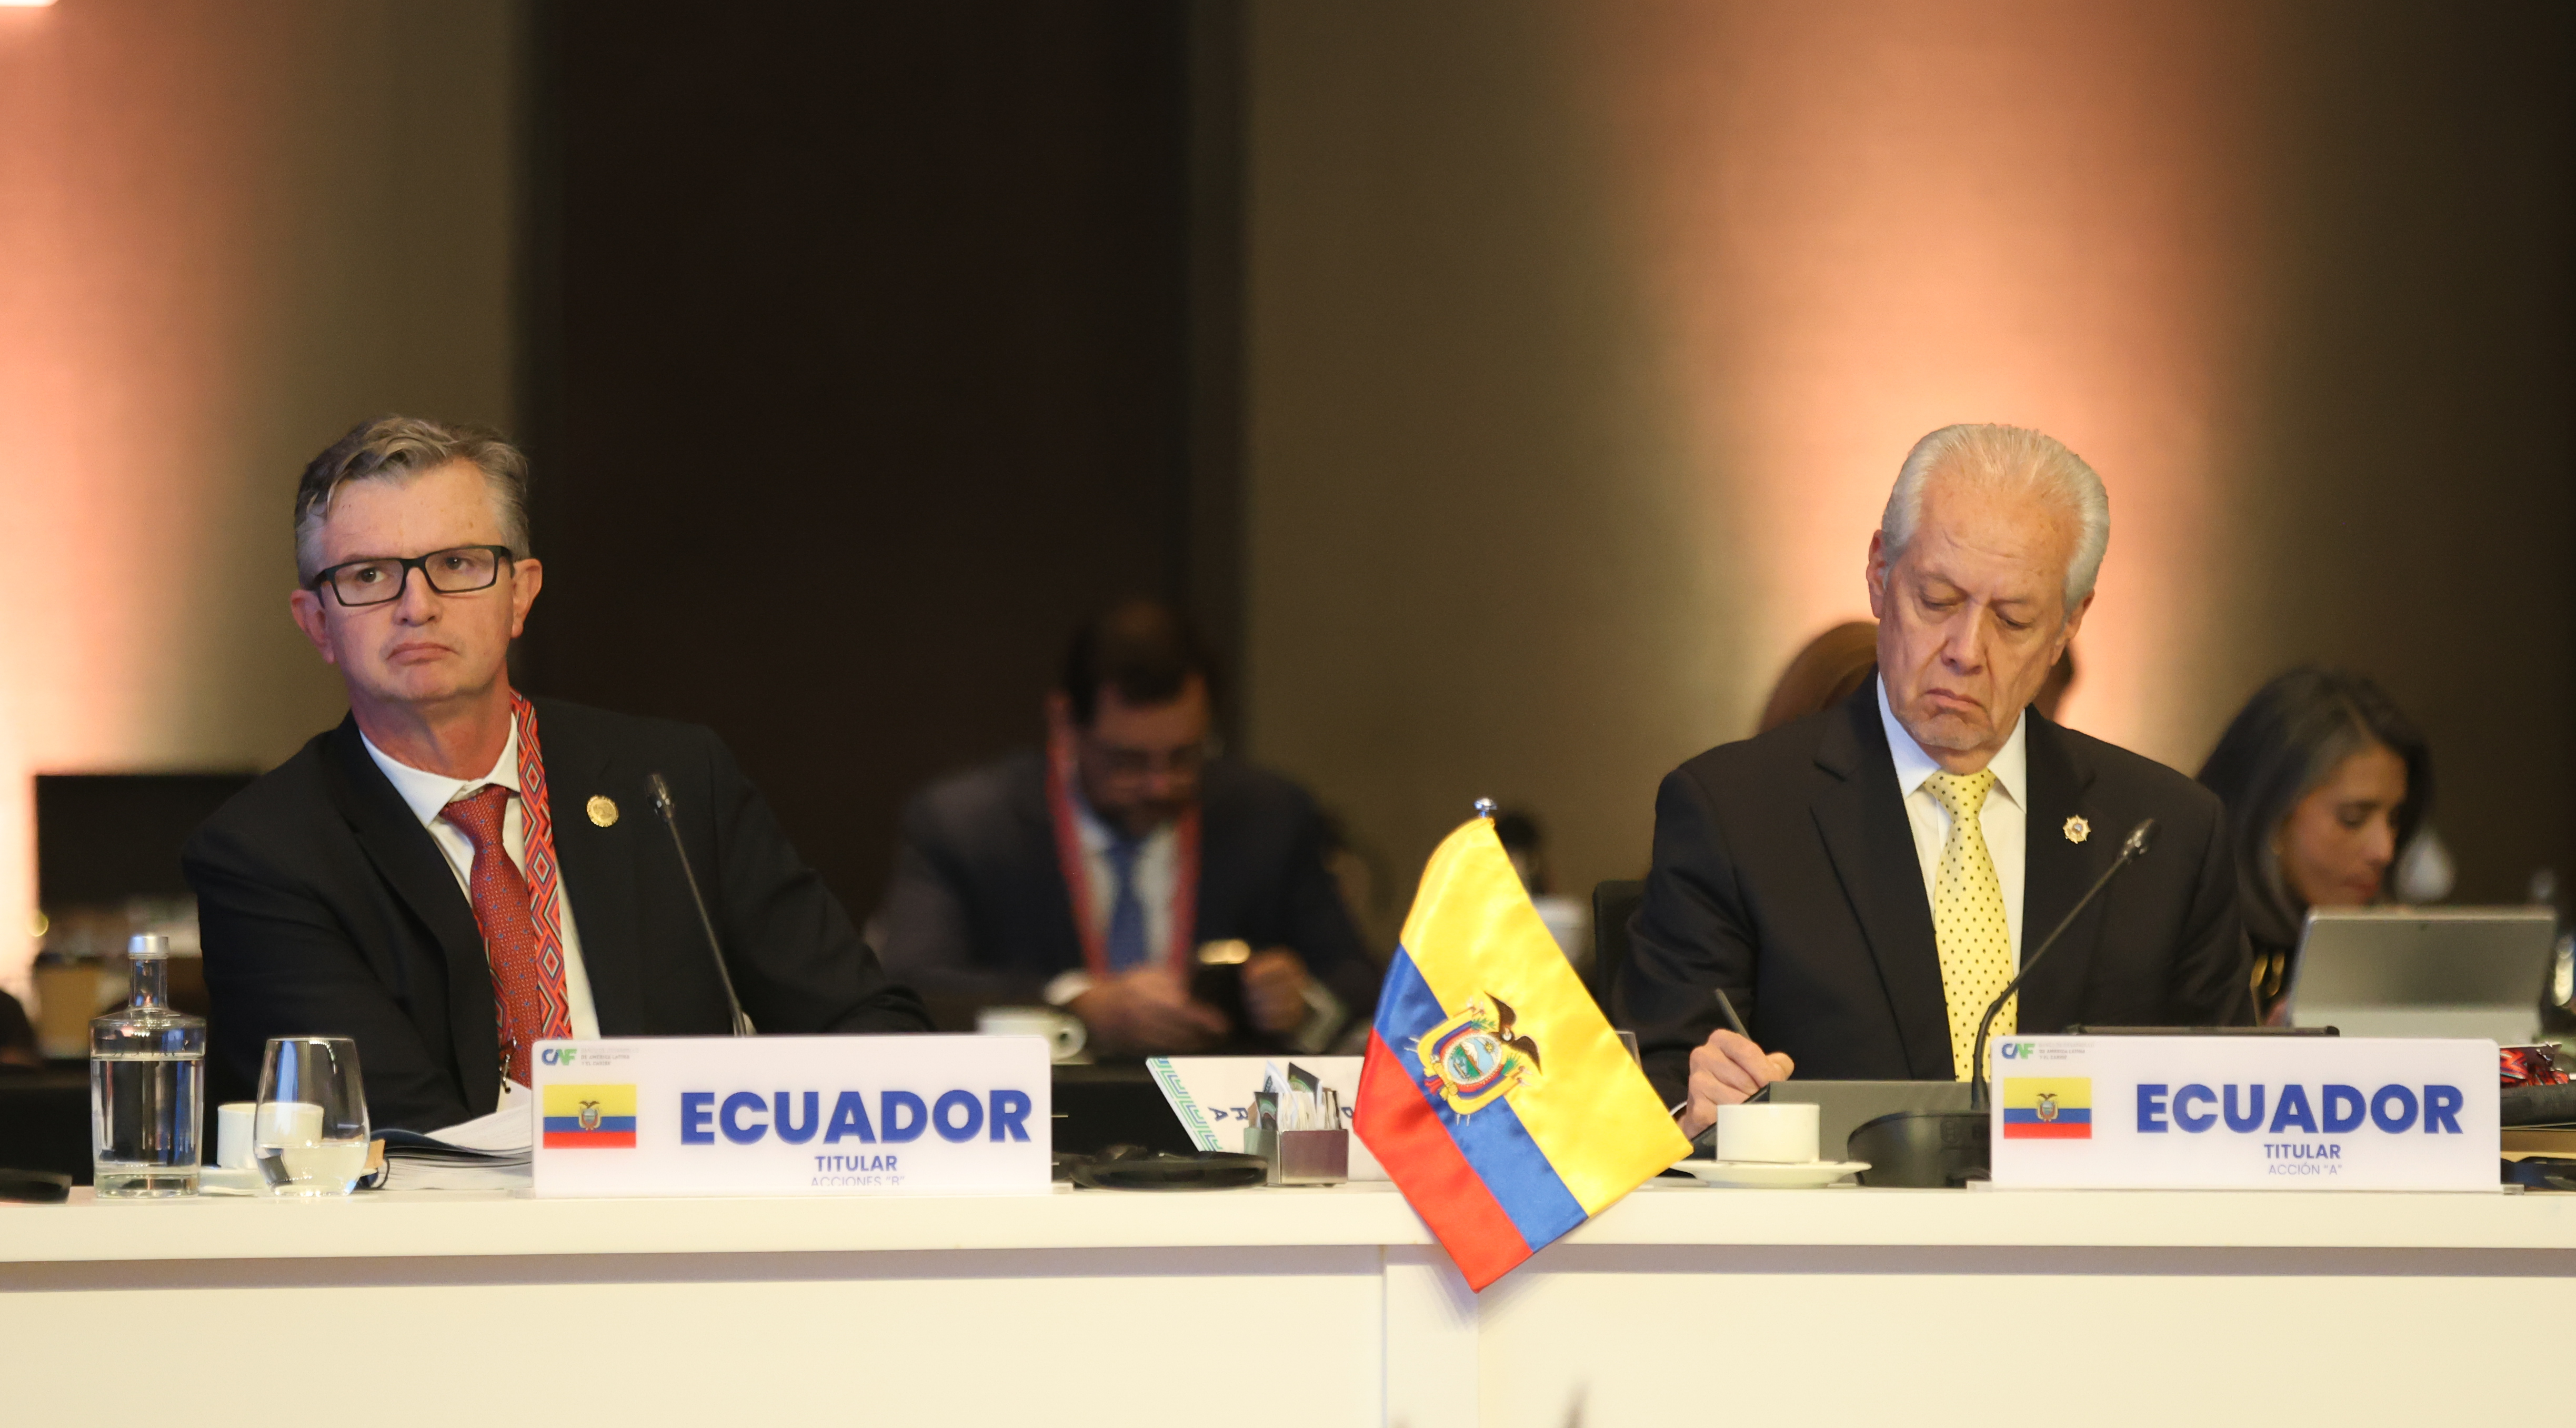 CAF approves USD 400 million for small businesses in Ecuador